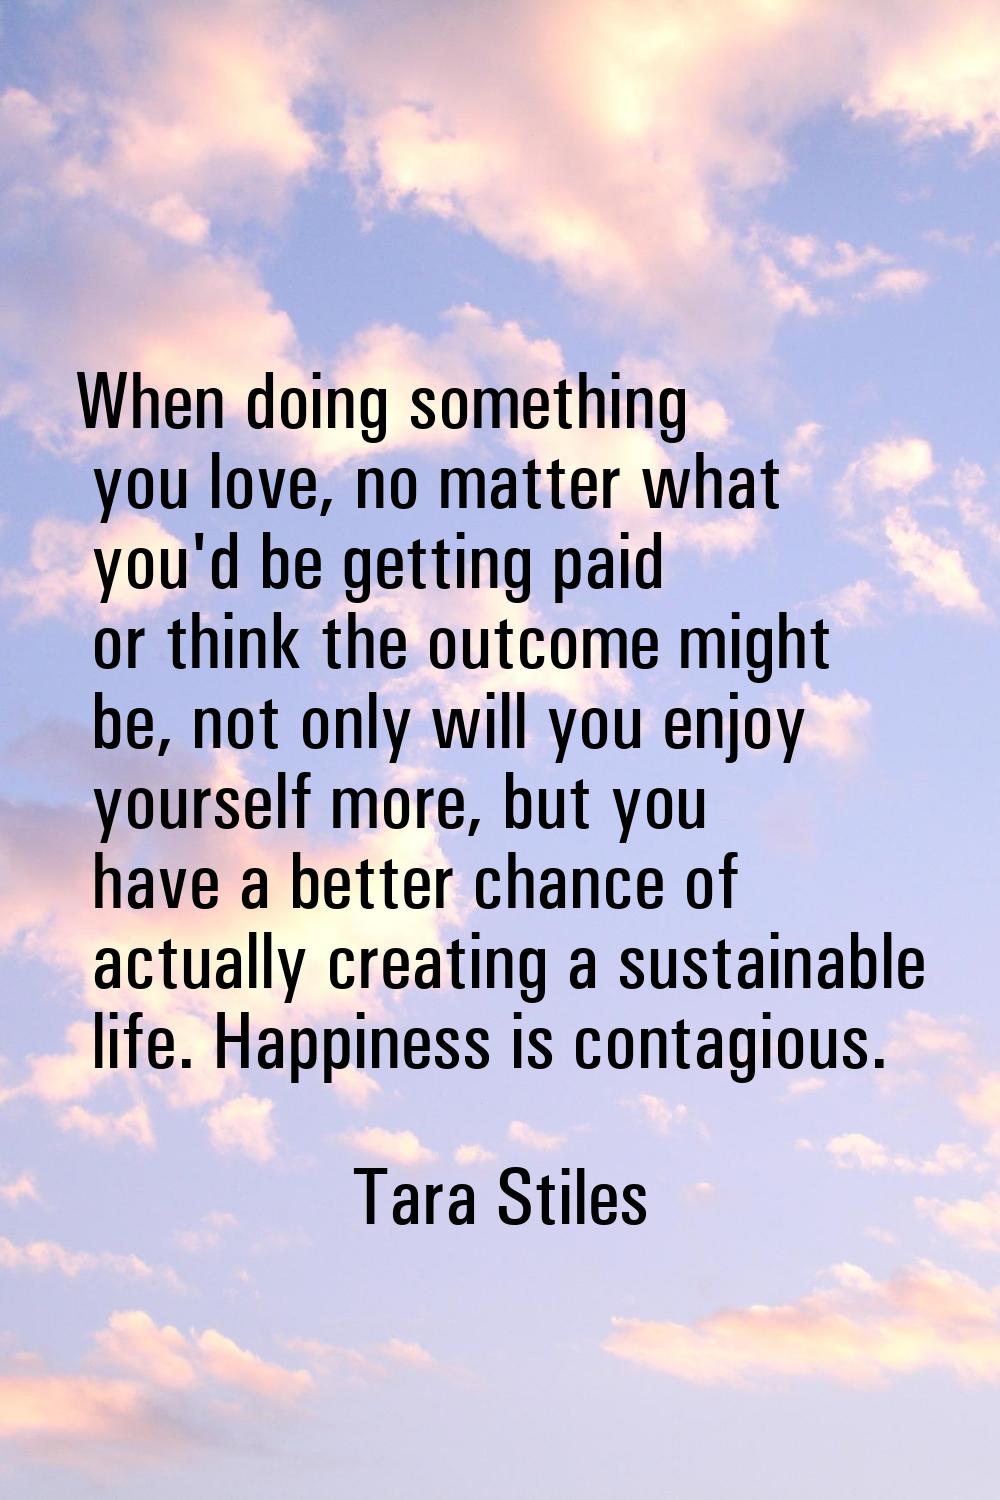 When doing something you love, no matter what you'd be getting paid or think the outcome might be, 